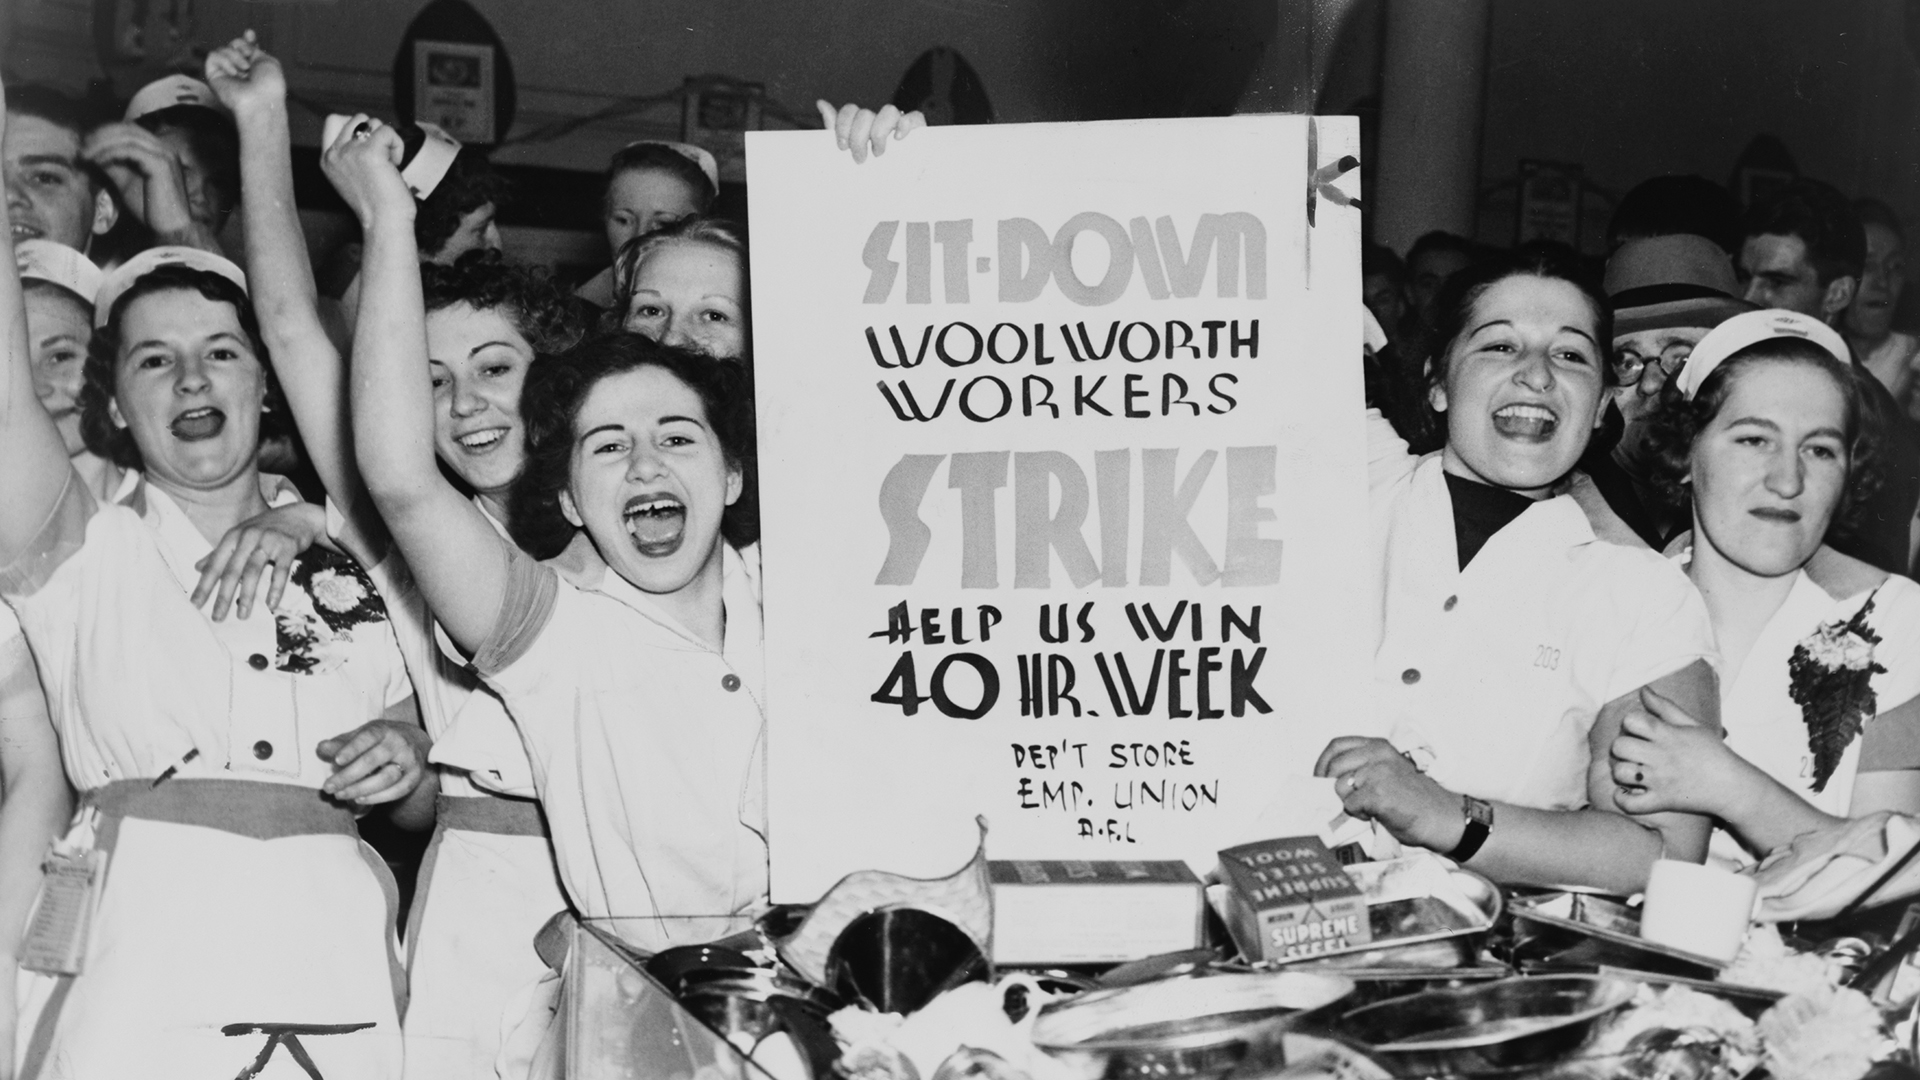 Female employees of Woolworth's hold a sign indicating they are striking for a 40-hour work week, in 1937.